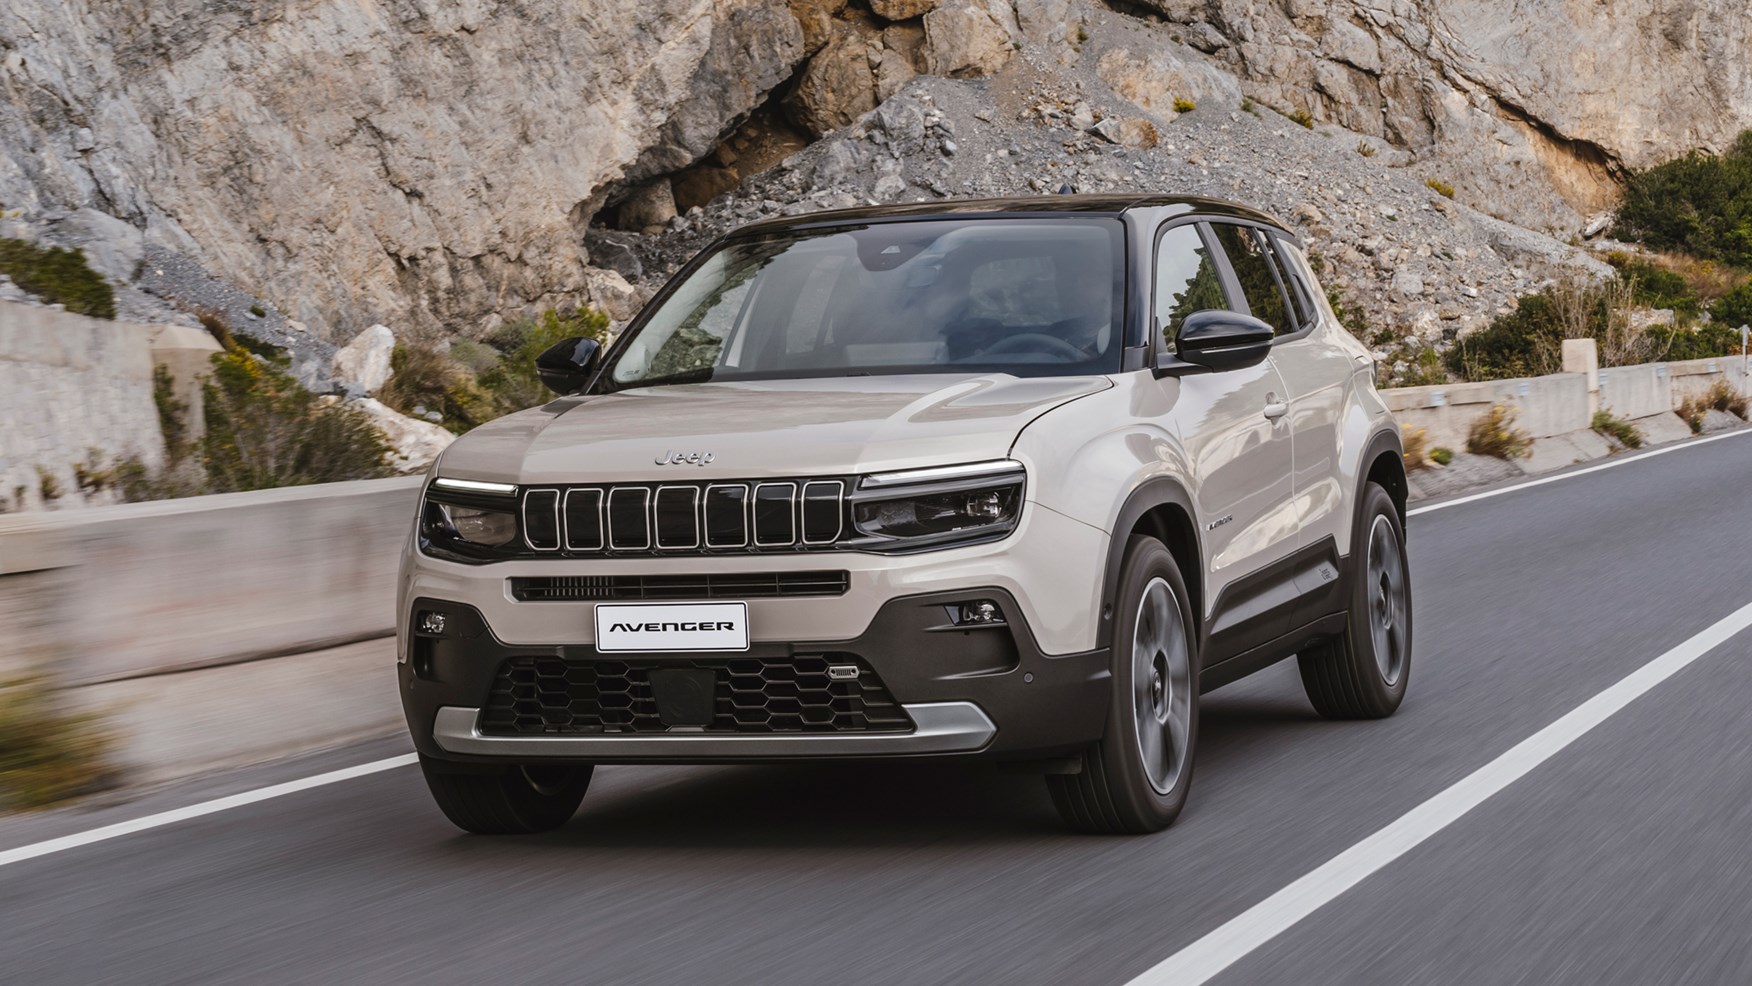 The New Jeep Avenger - 100% electric Jeep - Car Of the Year 2023